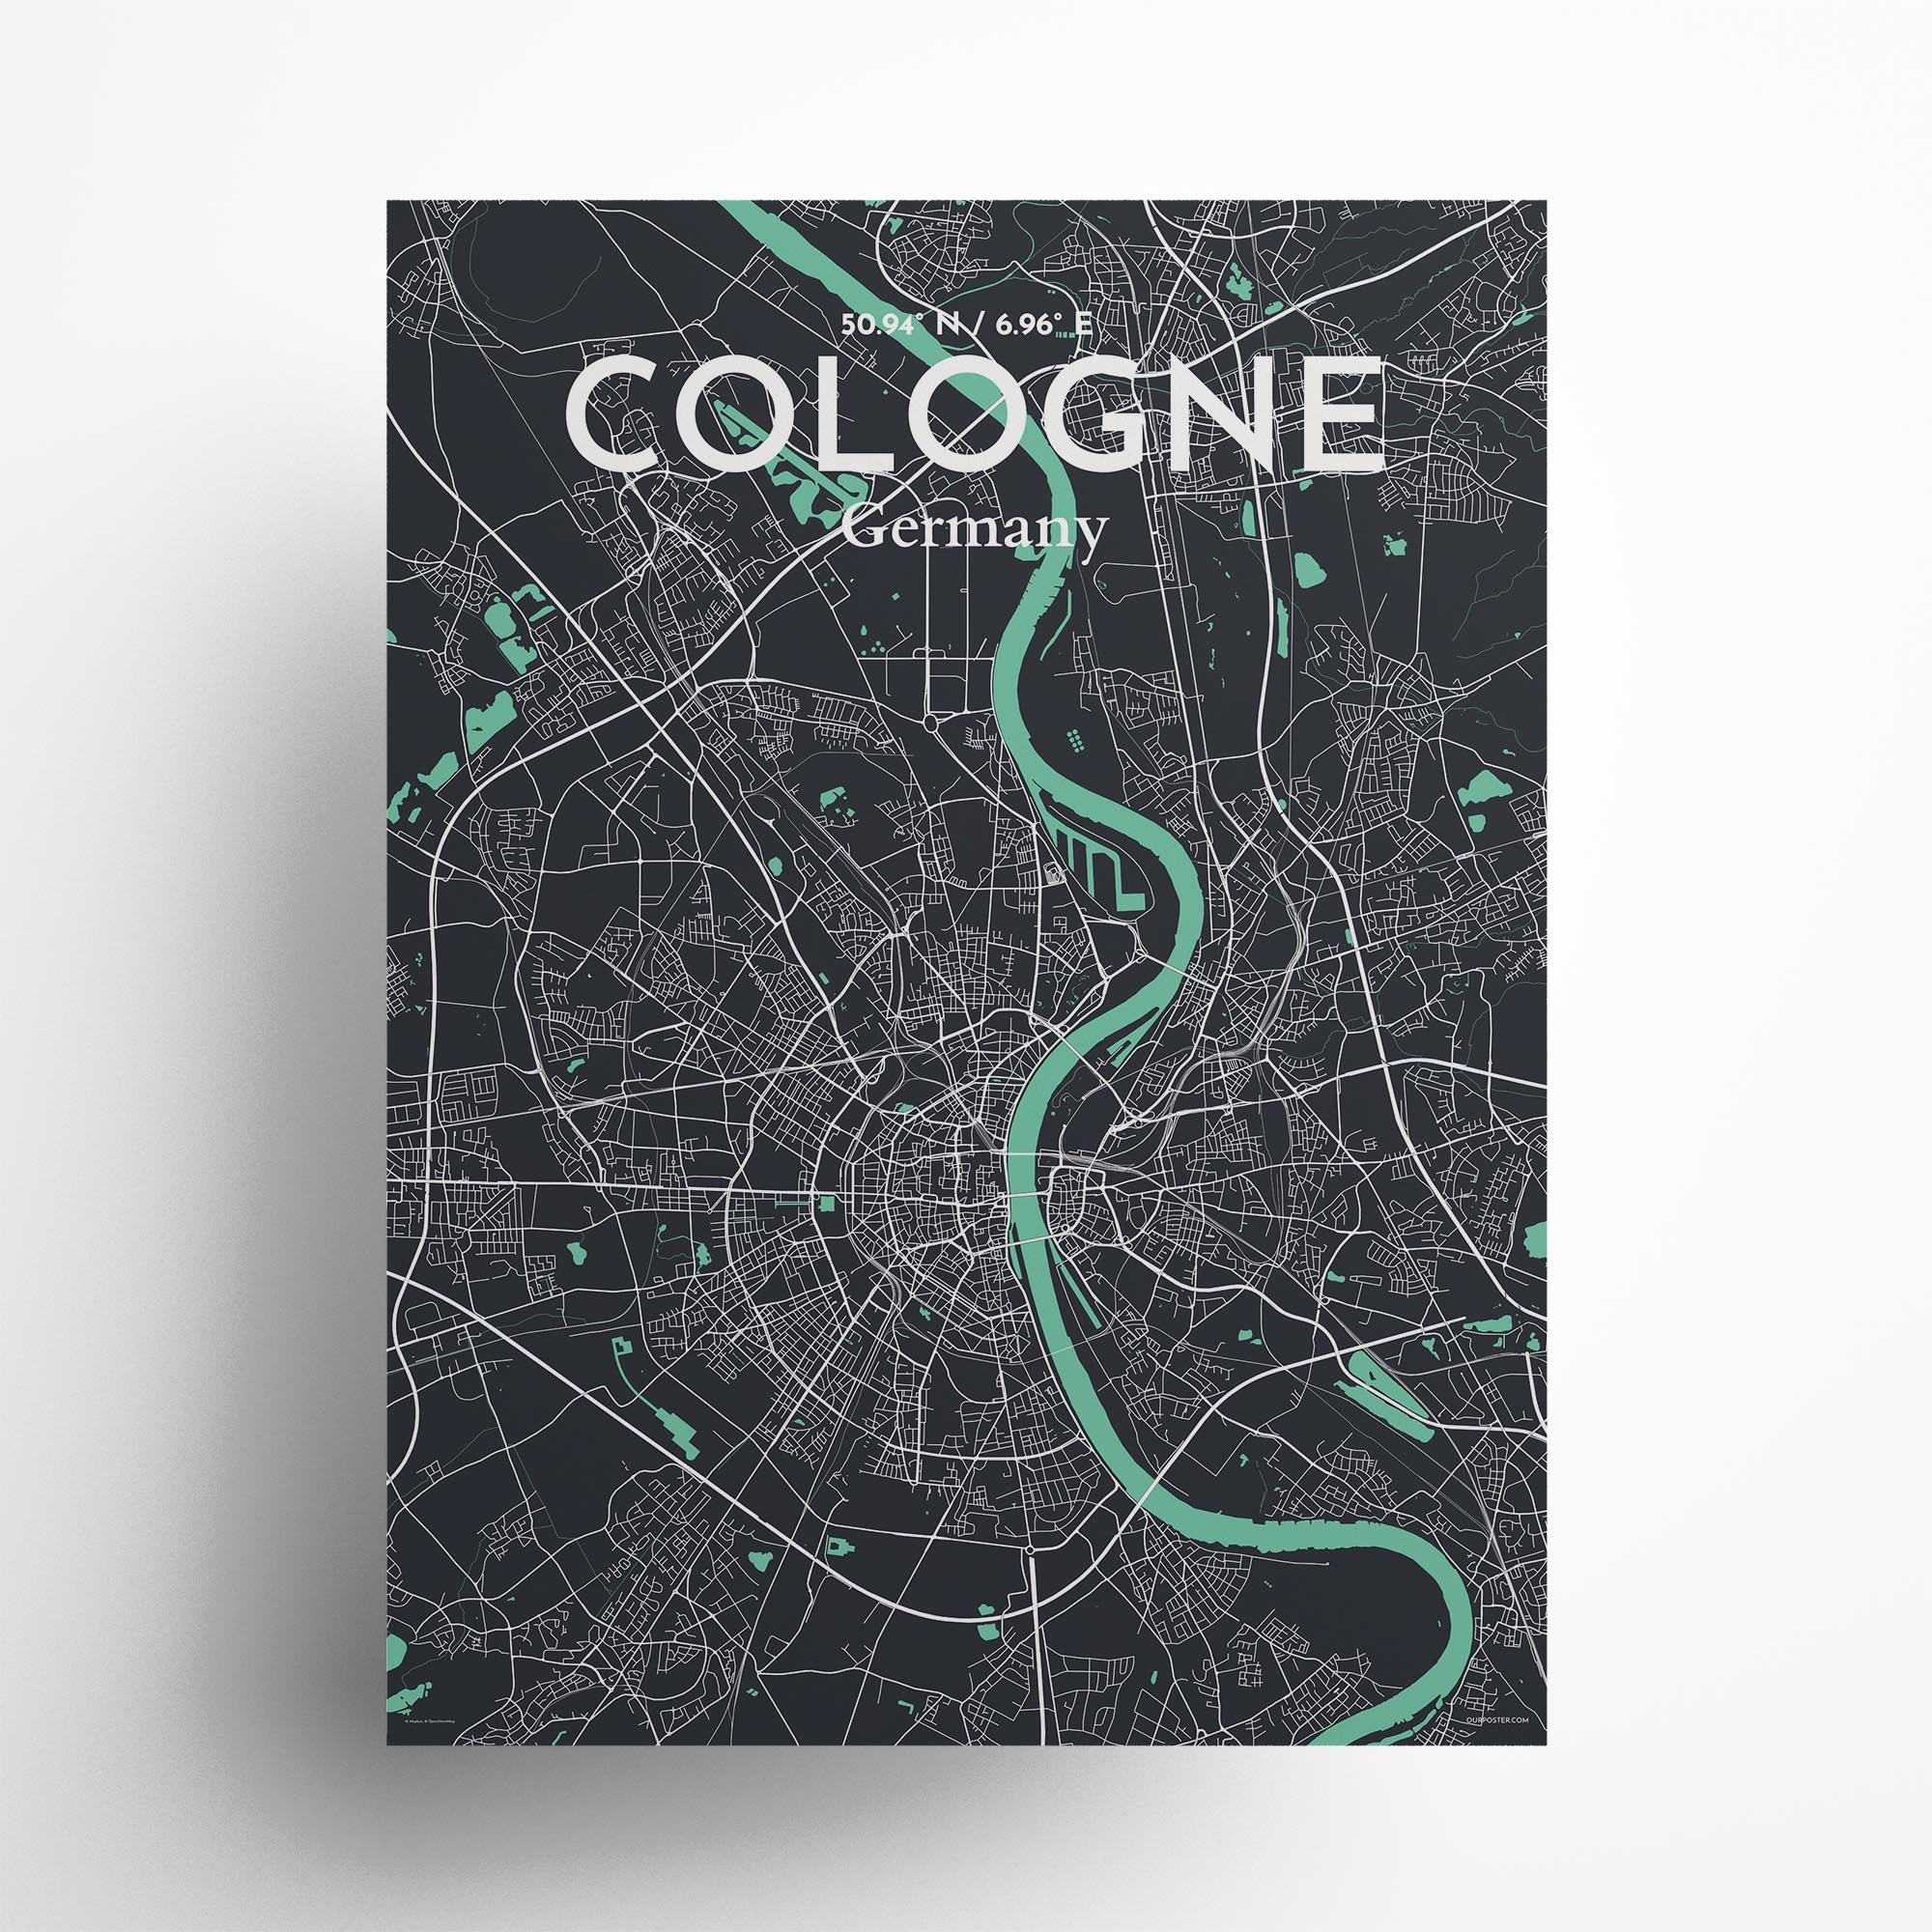 Cologne city map poster in Dream of size 18" x 24"